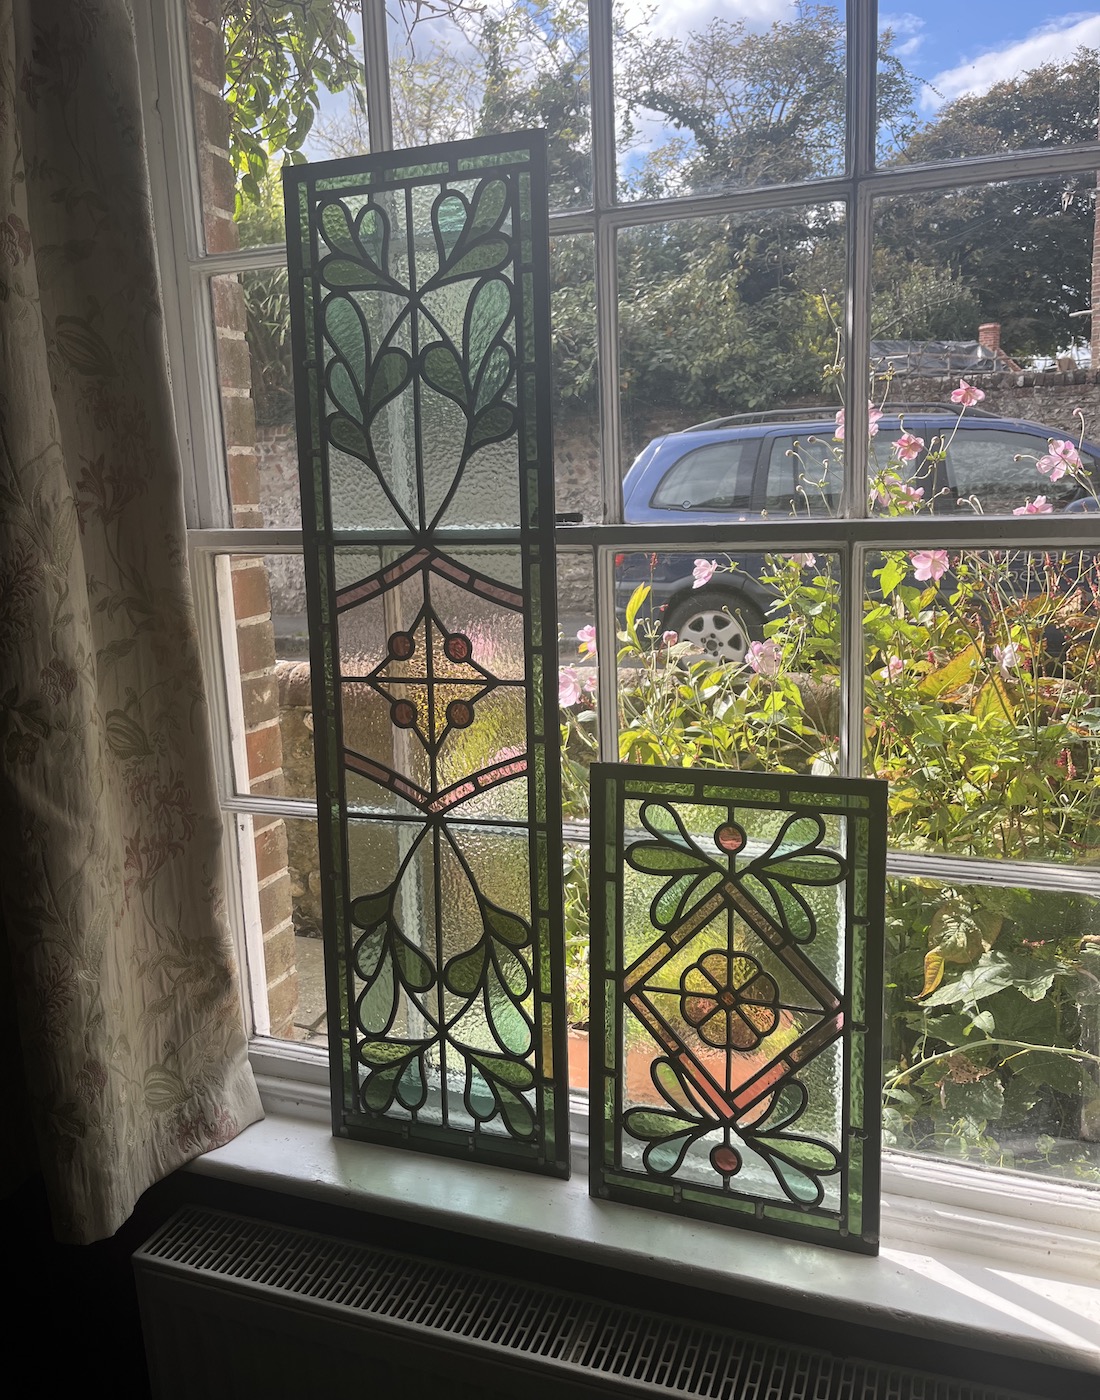 Bespoke stained glass window, design by Pfeiffer Design working with our stained glass window artisan to pick colours and patterns. Colour scheme is pinks and greens, reflecting the feminine aesthetic of the home